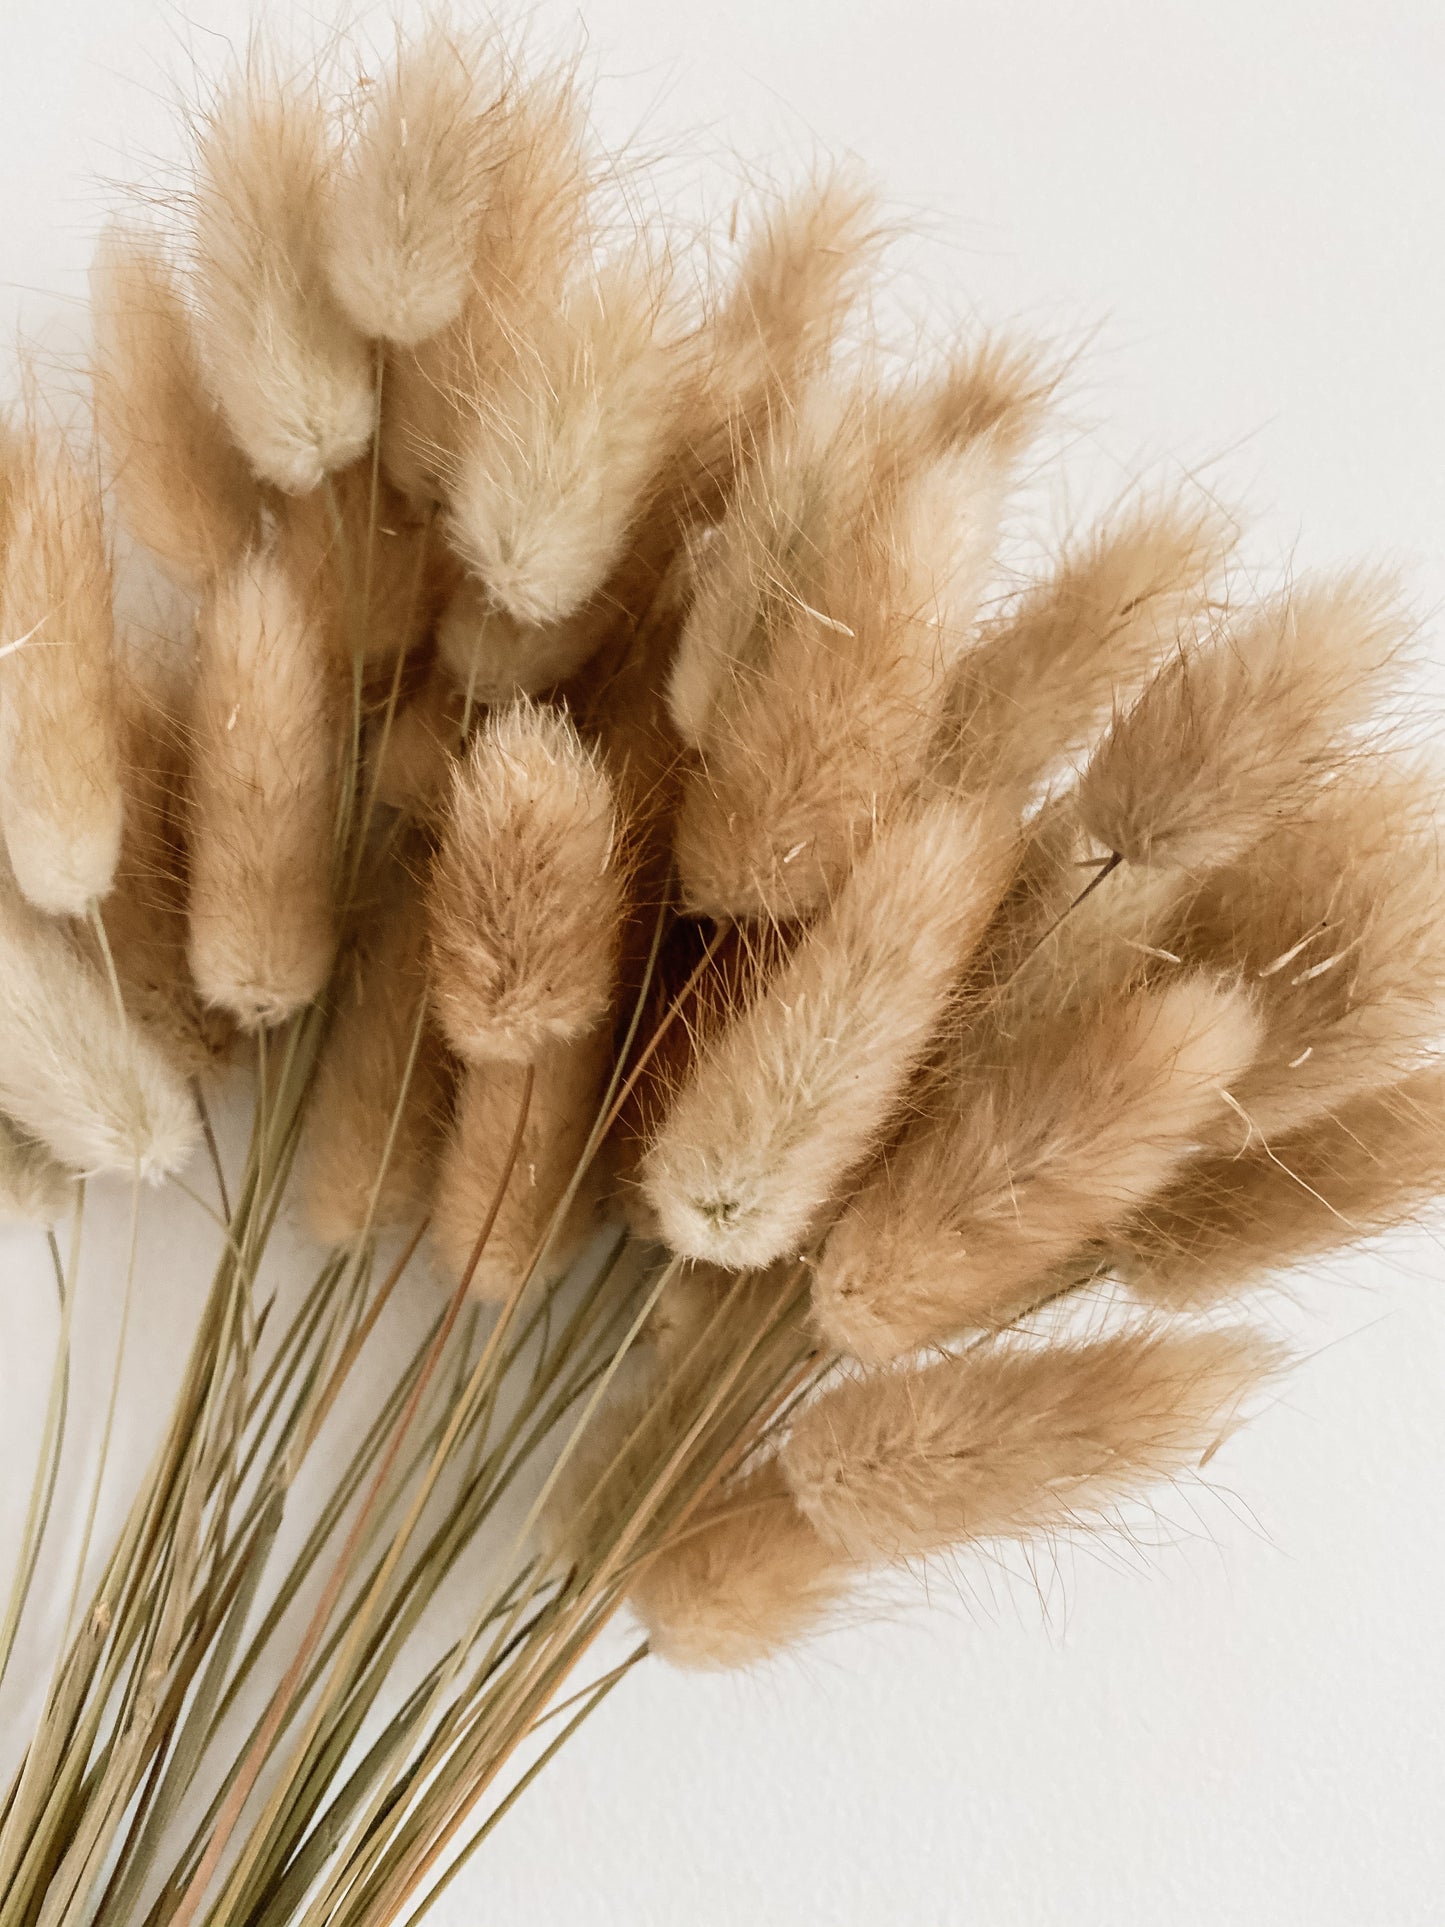 Dried Bunny Tails Natural SUN REPUBLIC 